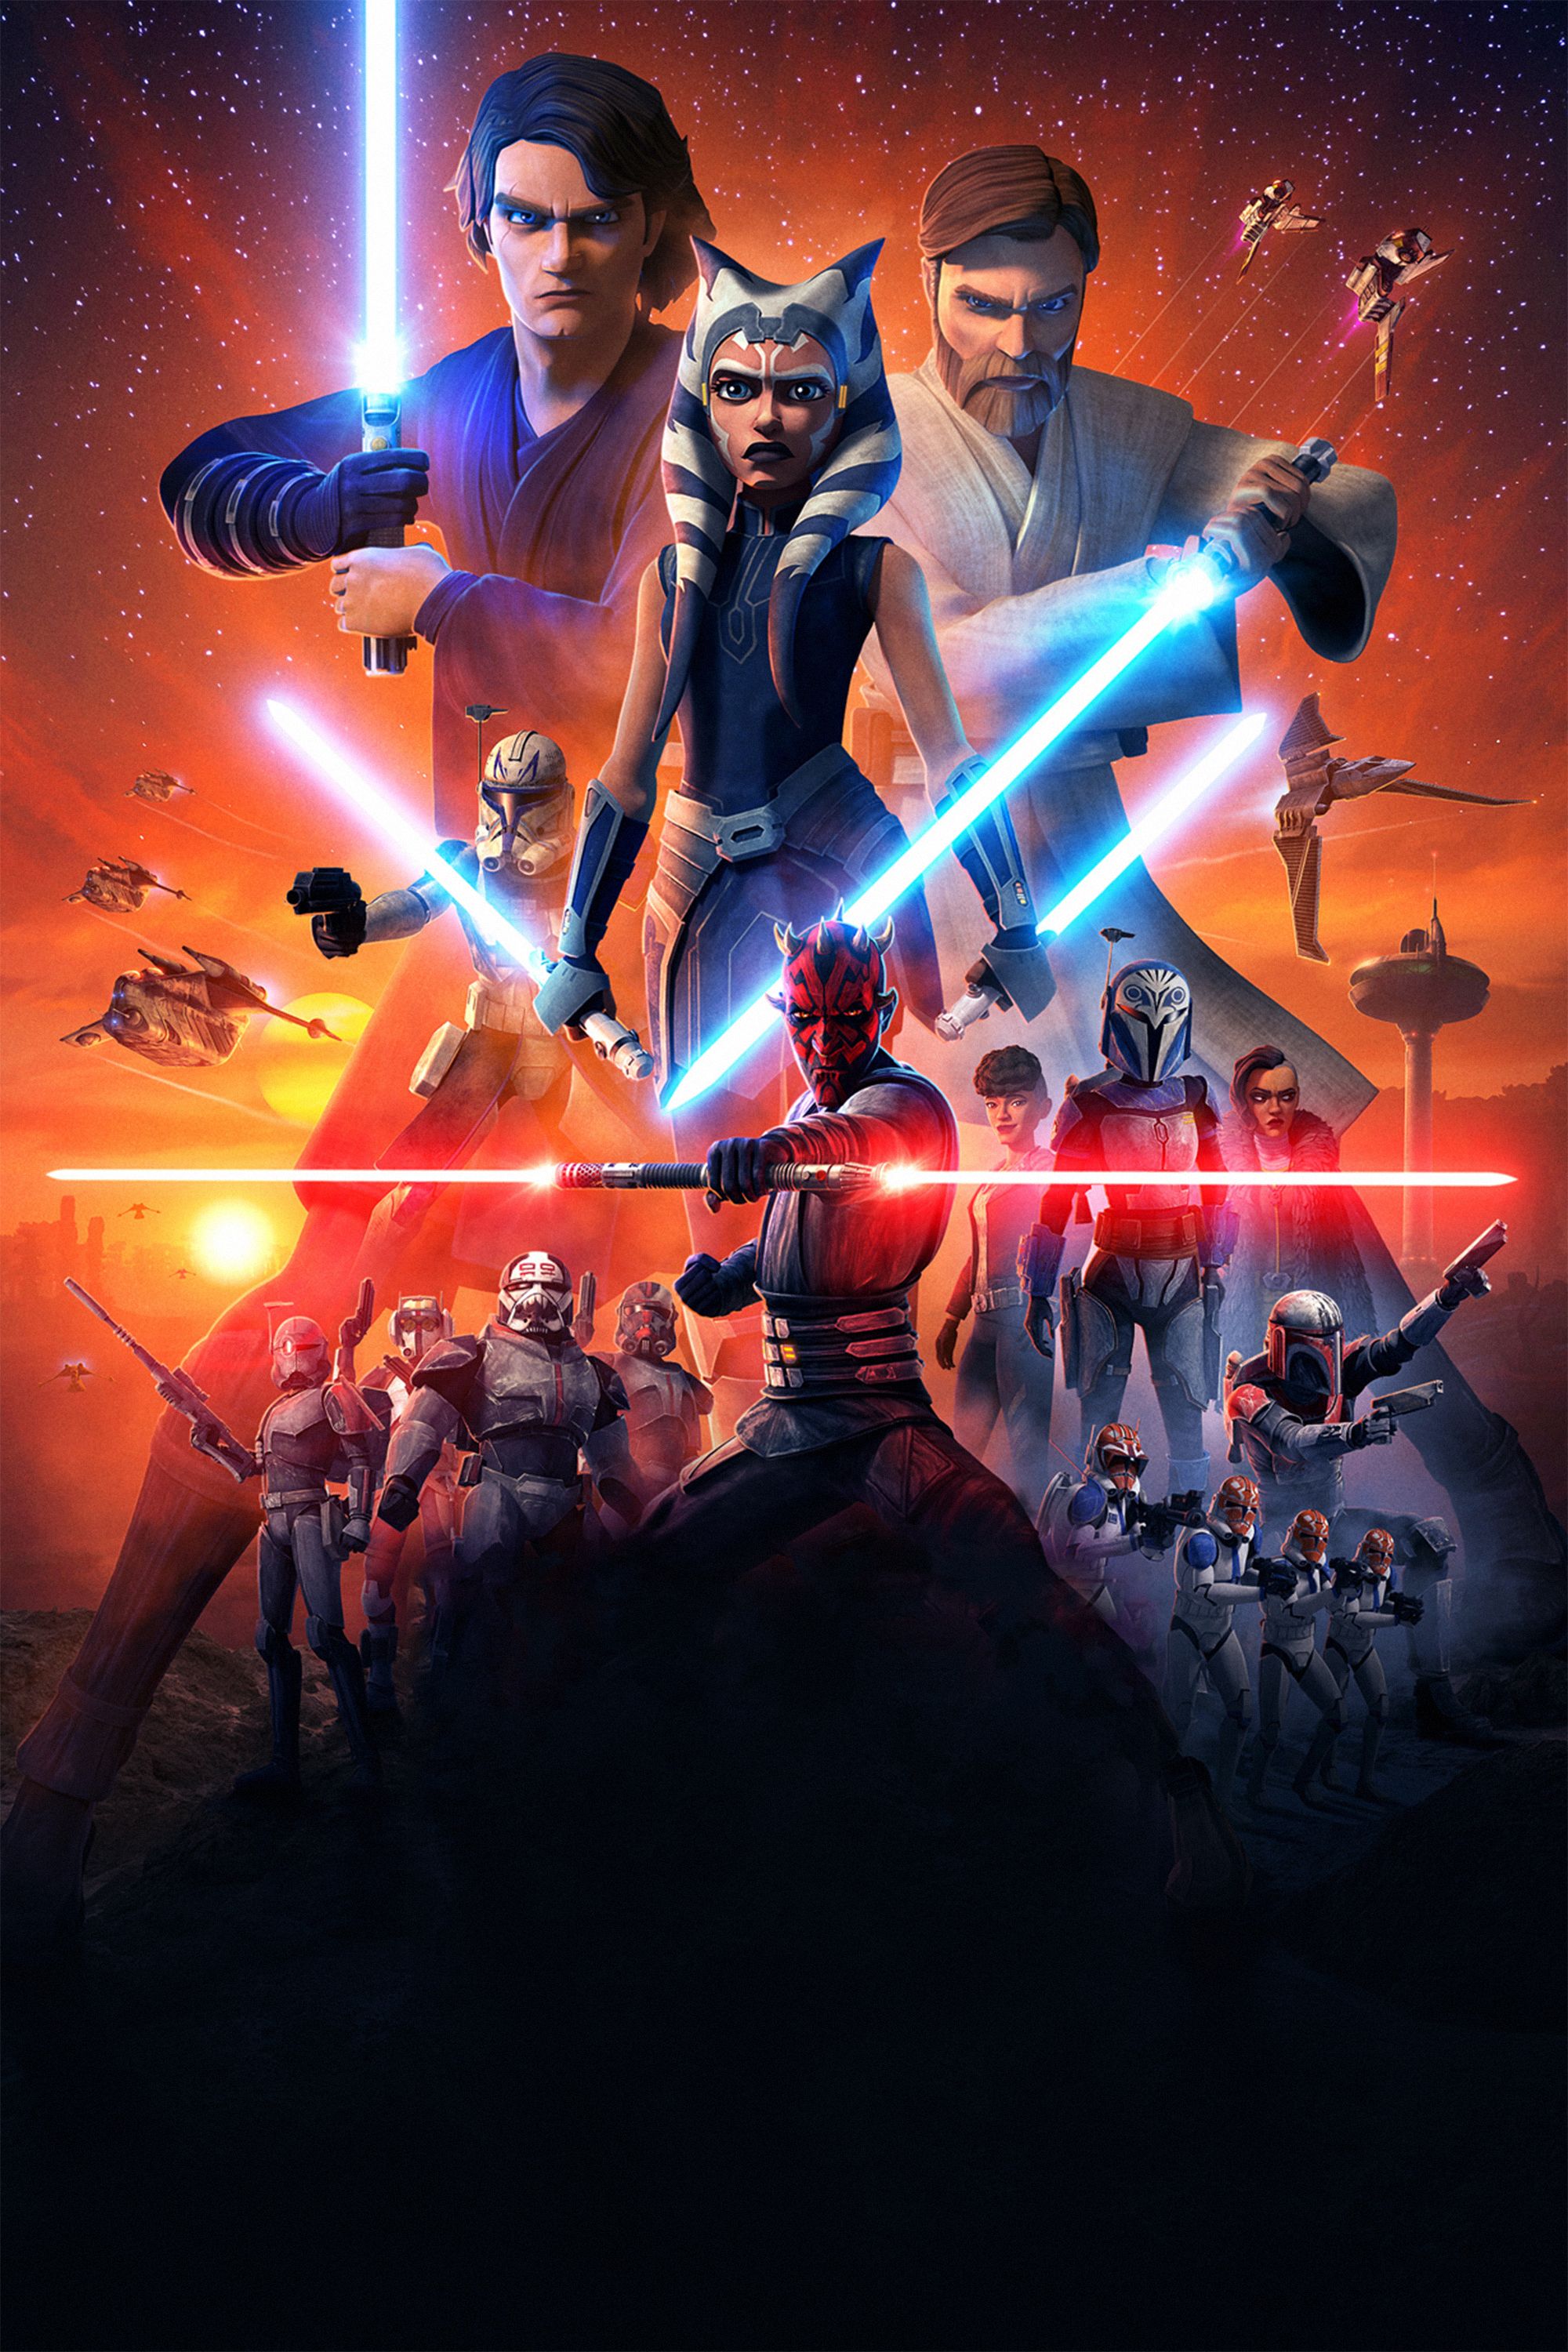 The Clone Wars 2020 Wallpaper, HD TV Series 4K Wallpaper, Image, Photo and Background